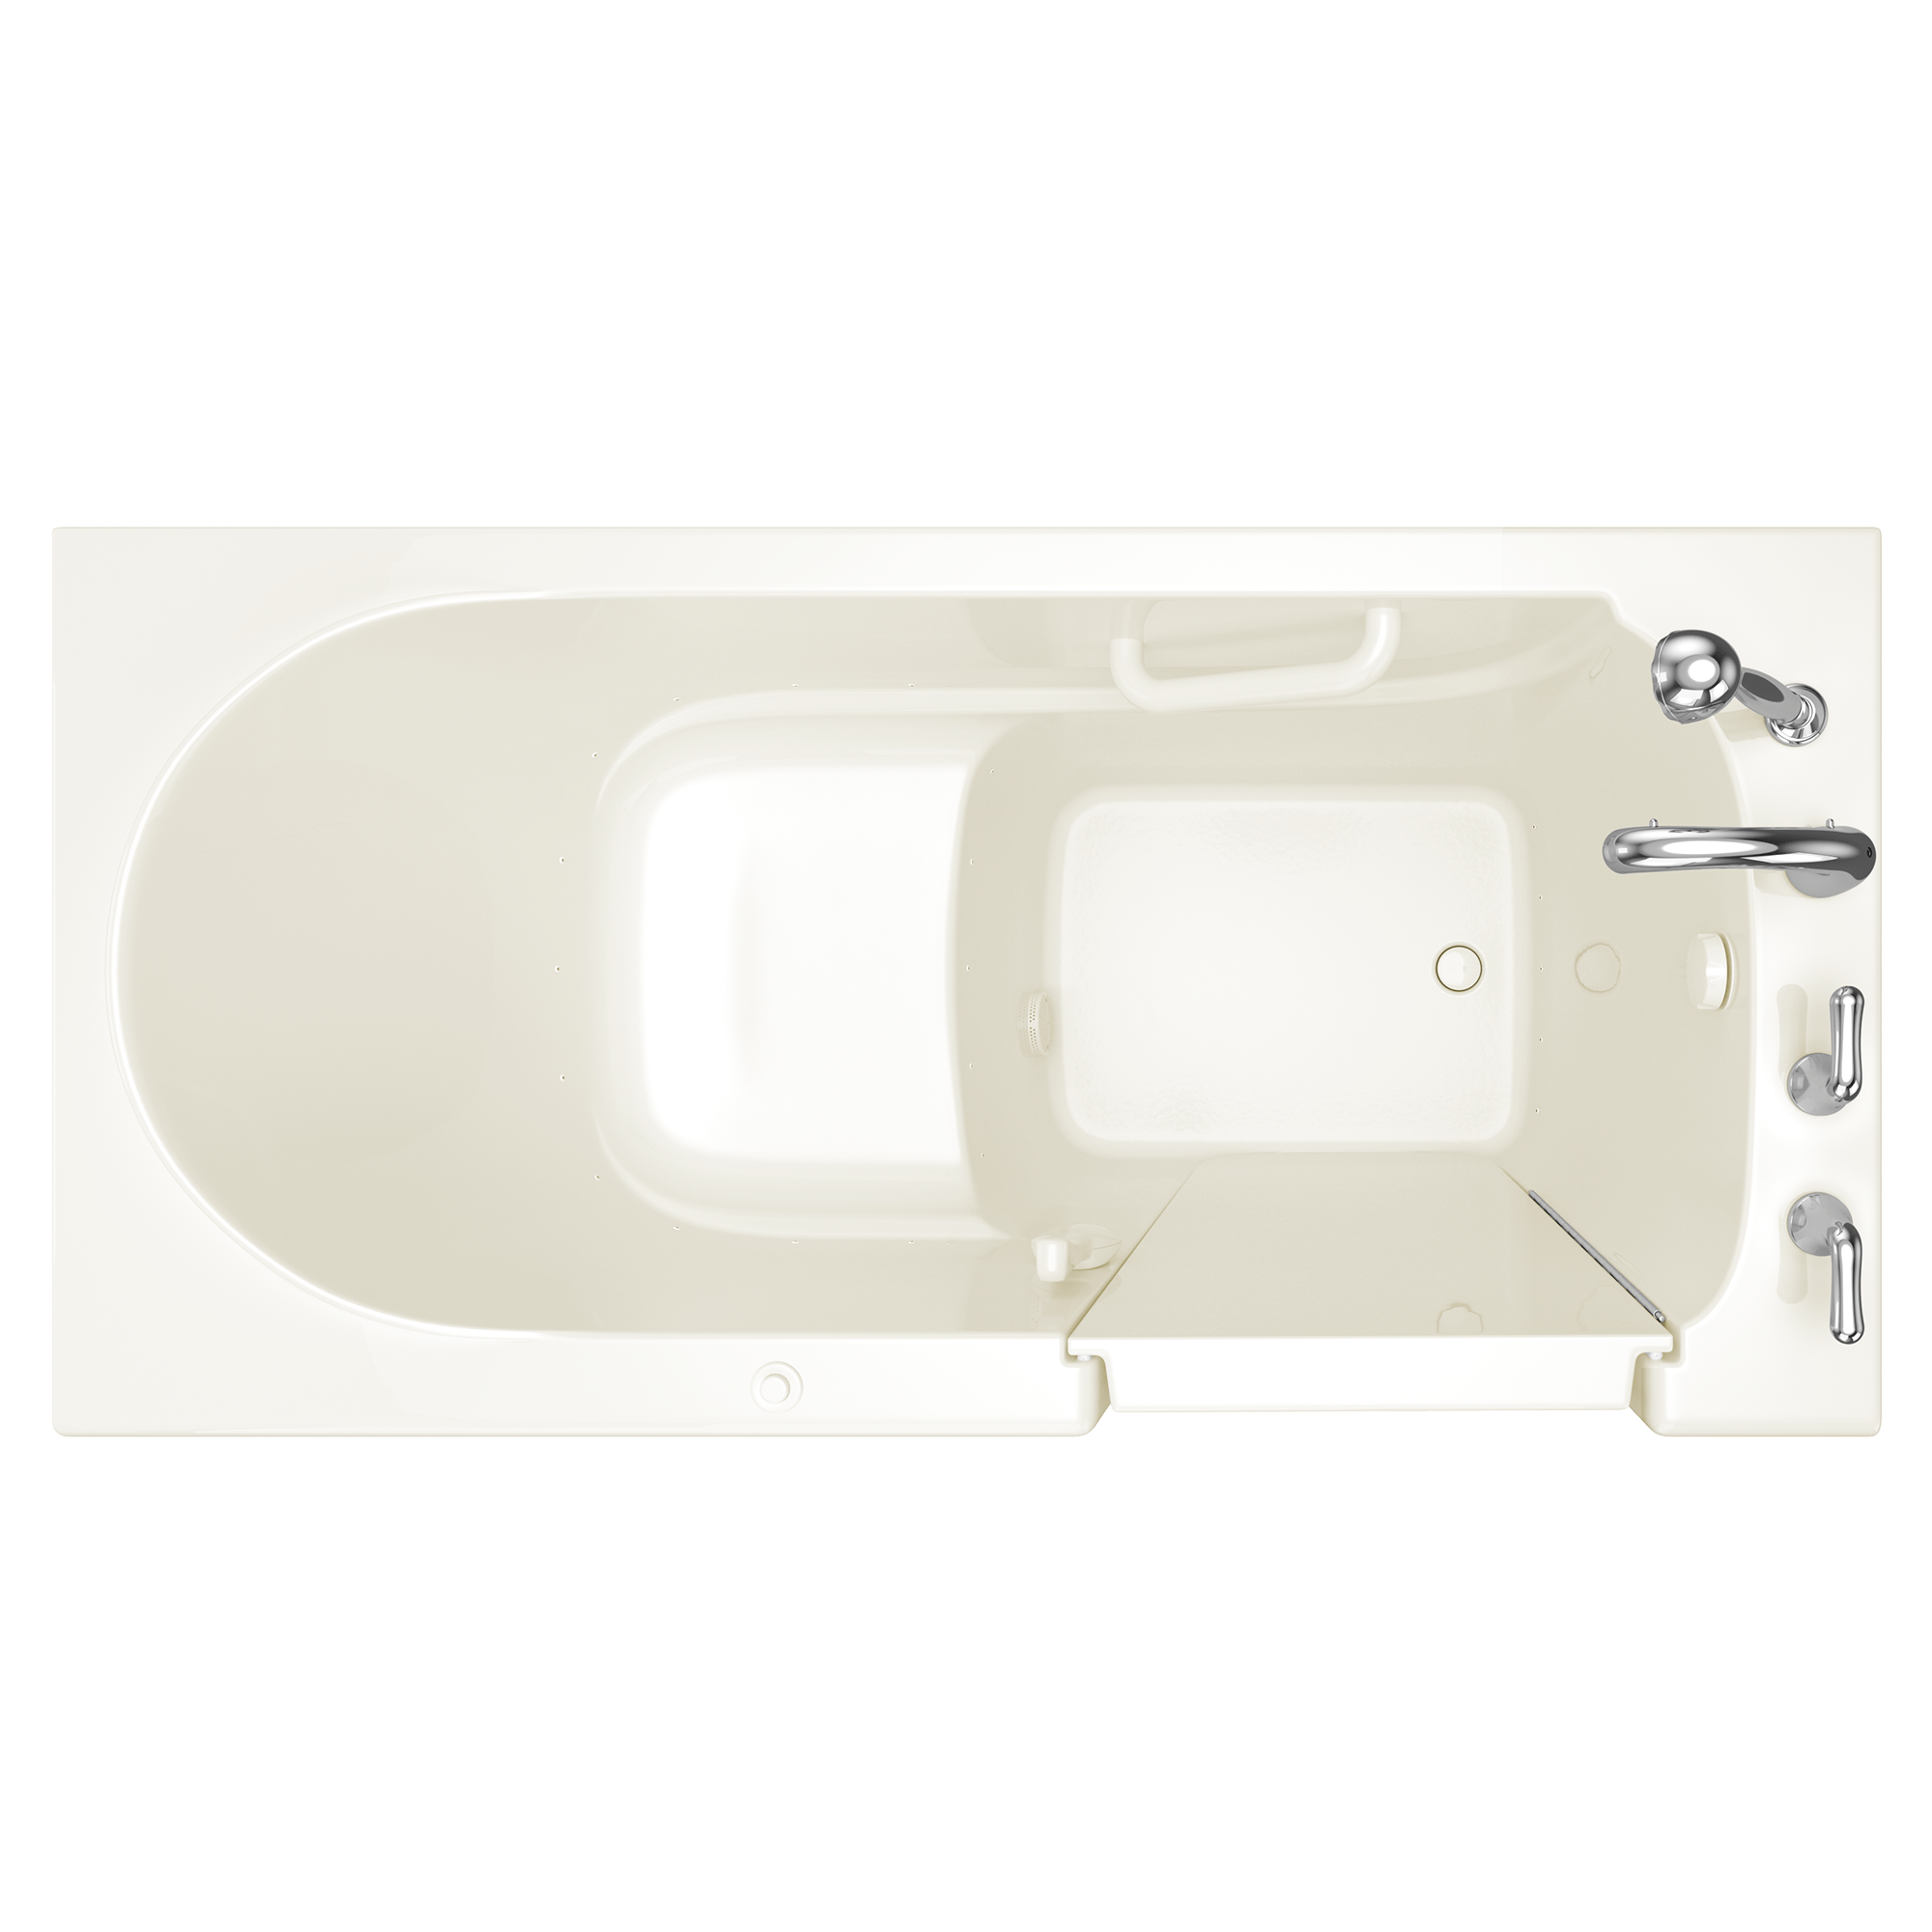 Gelcoat Entry Series 60 x 30 Inch Walk In Tub With Air Spa System - Right Hand Drain With Faucet ST BISCUIT